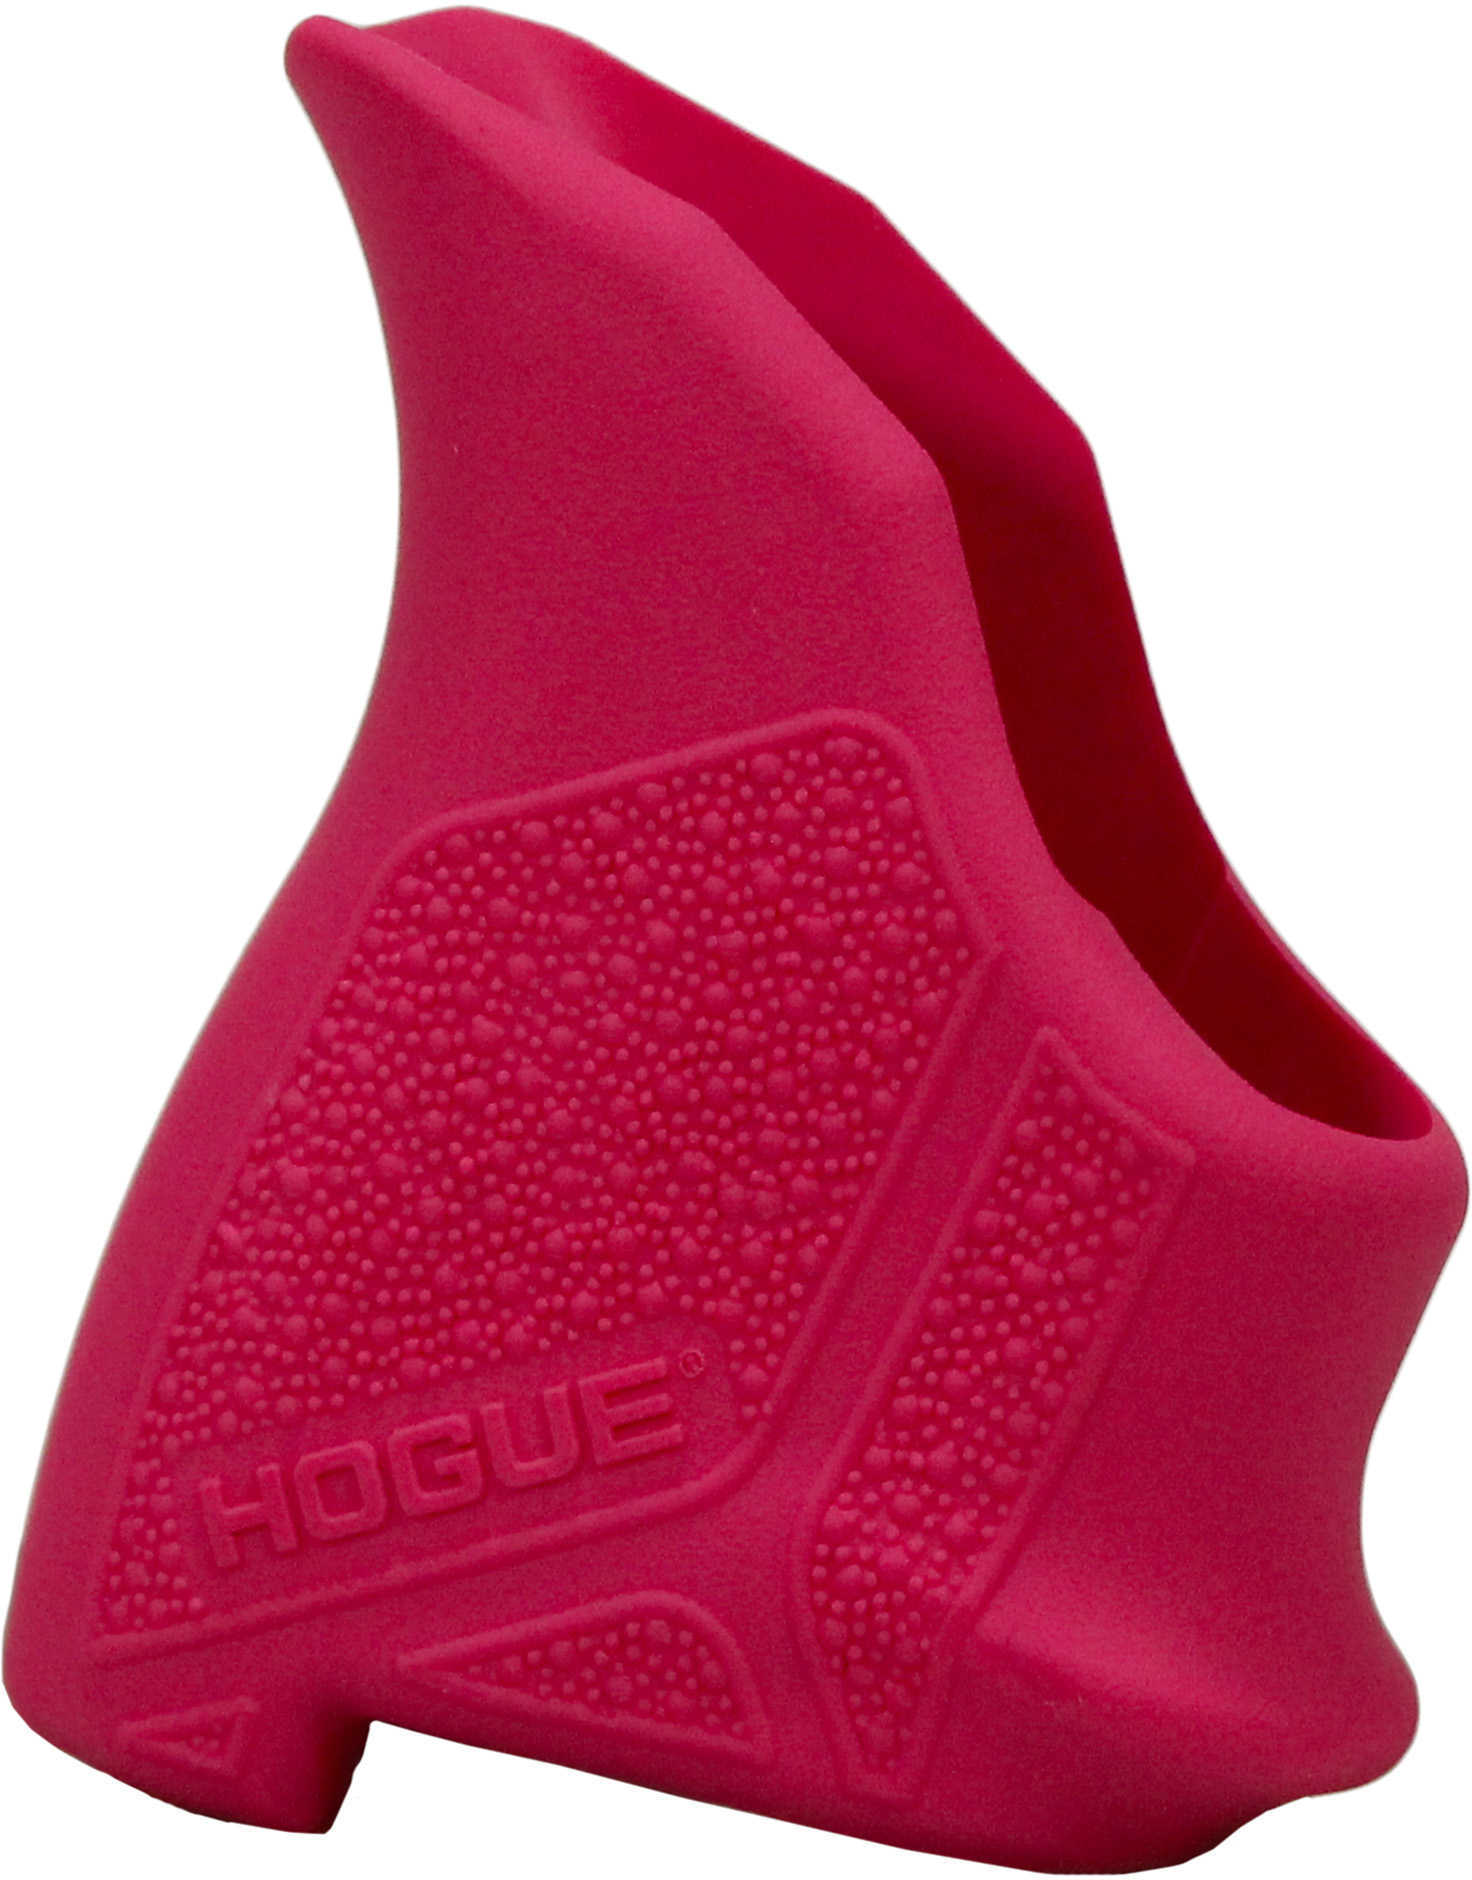 Hogue Grips HandAll Beavertail Pistol Fits Ruger® LCP II Rubber Finger Grooves Pink 18127